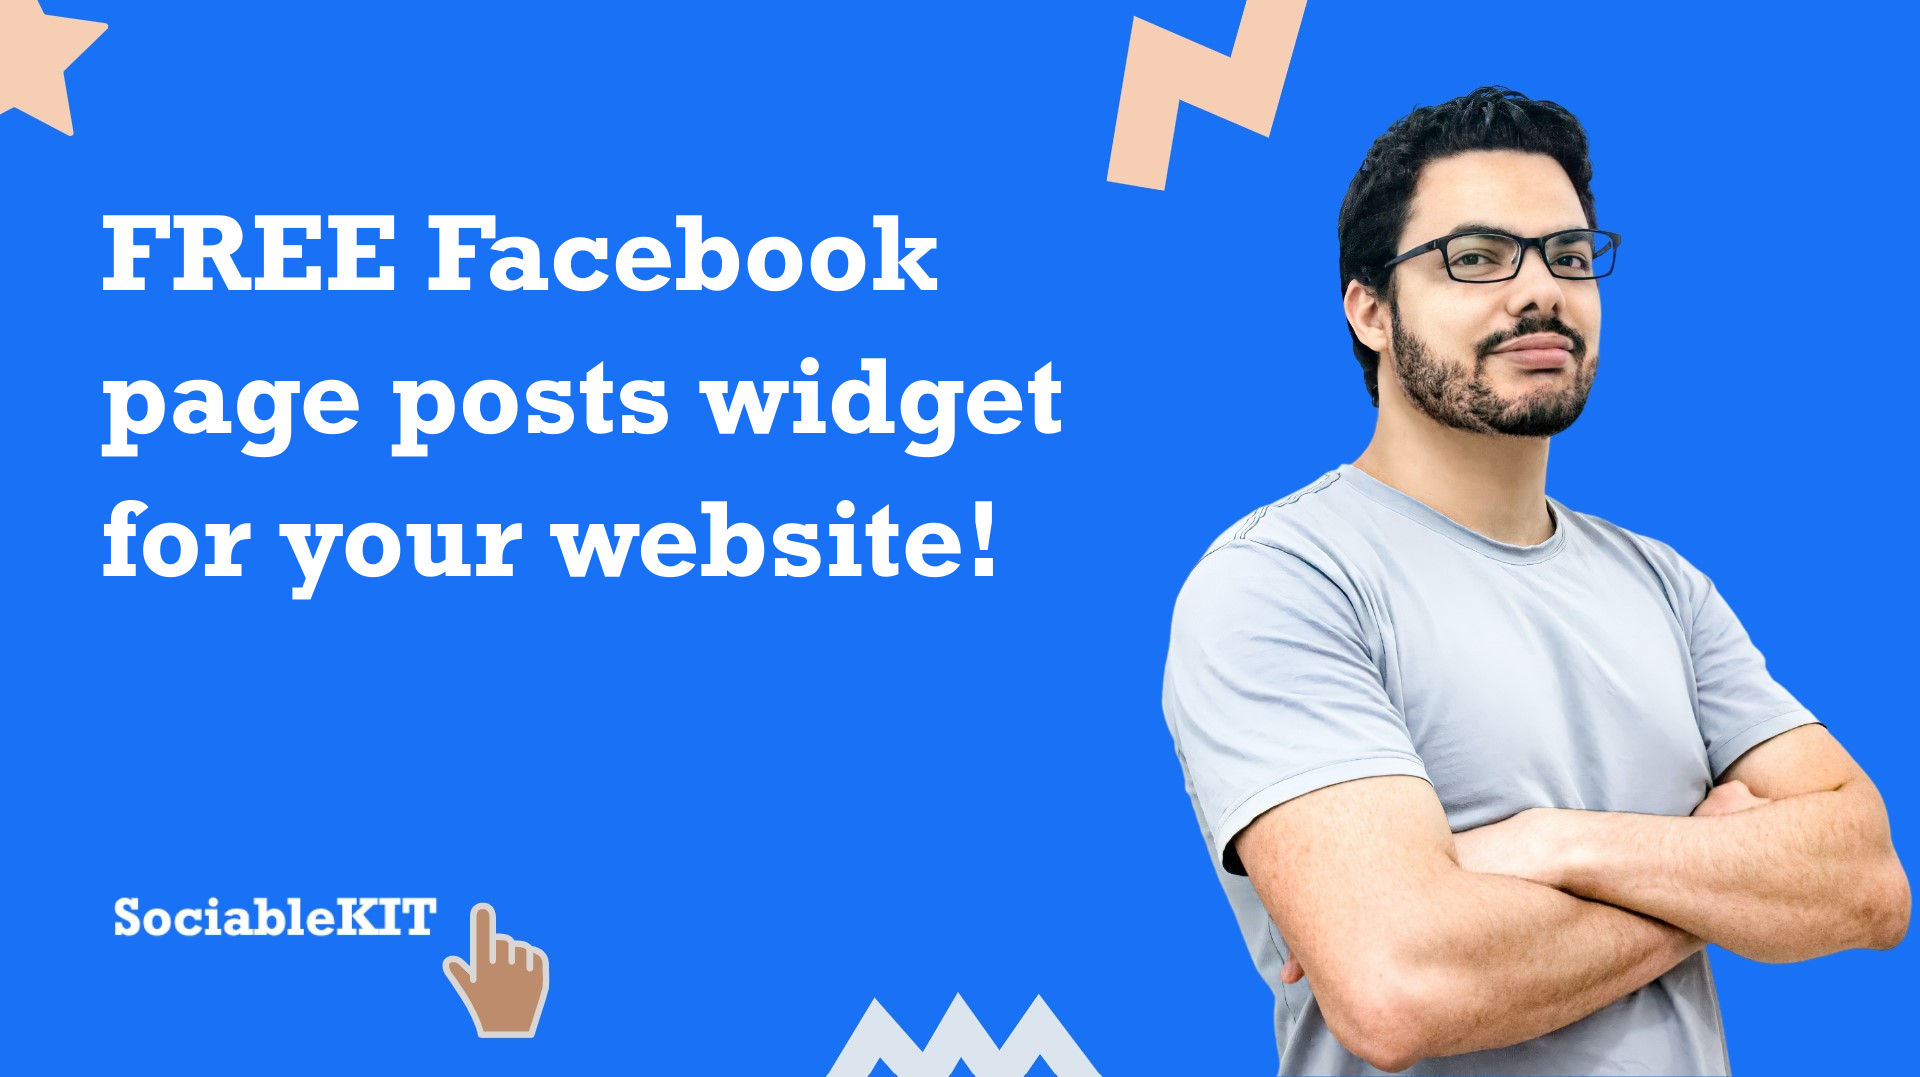 Free Facebook page posts widget for your website